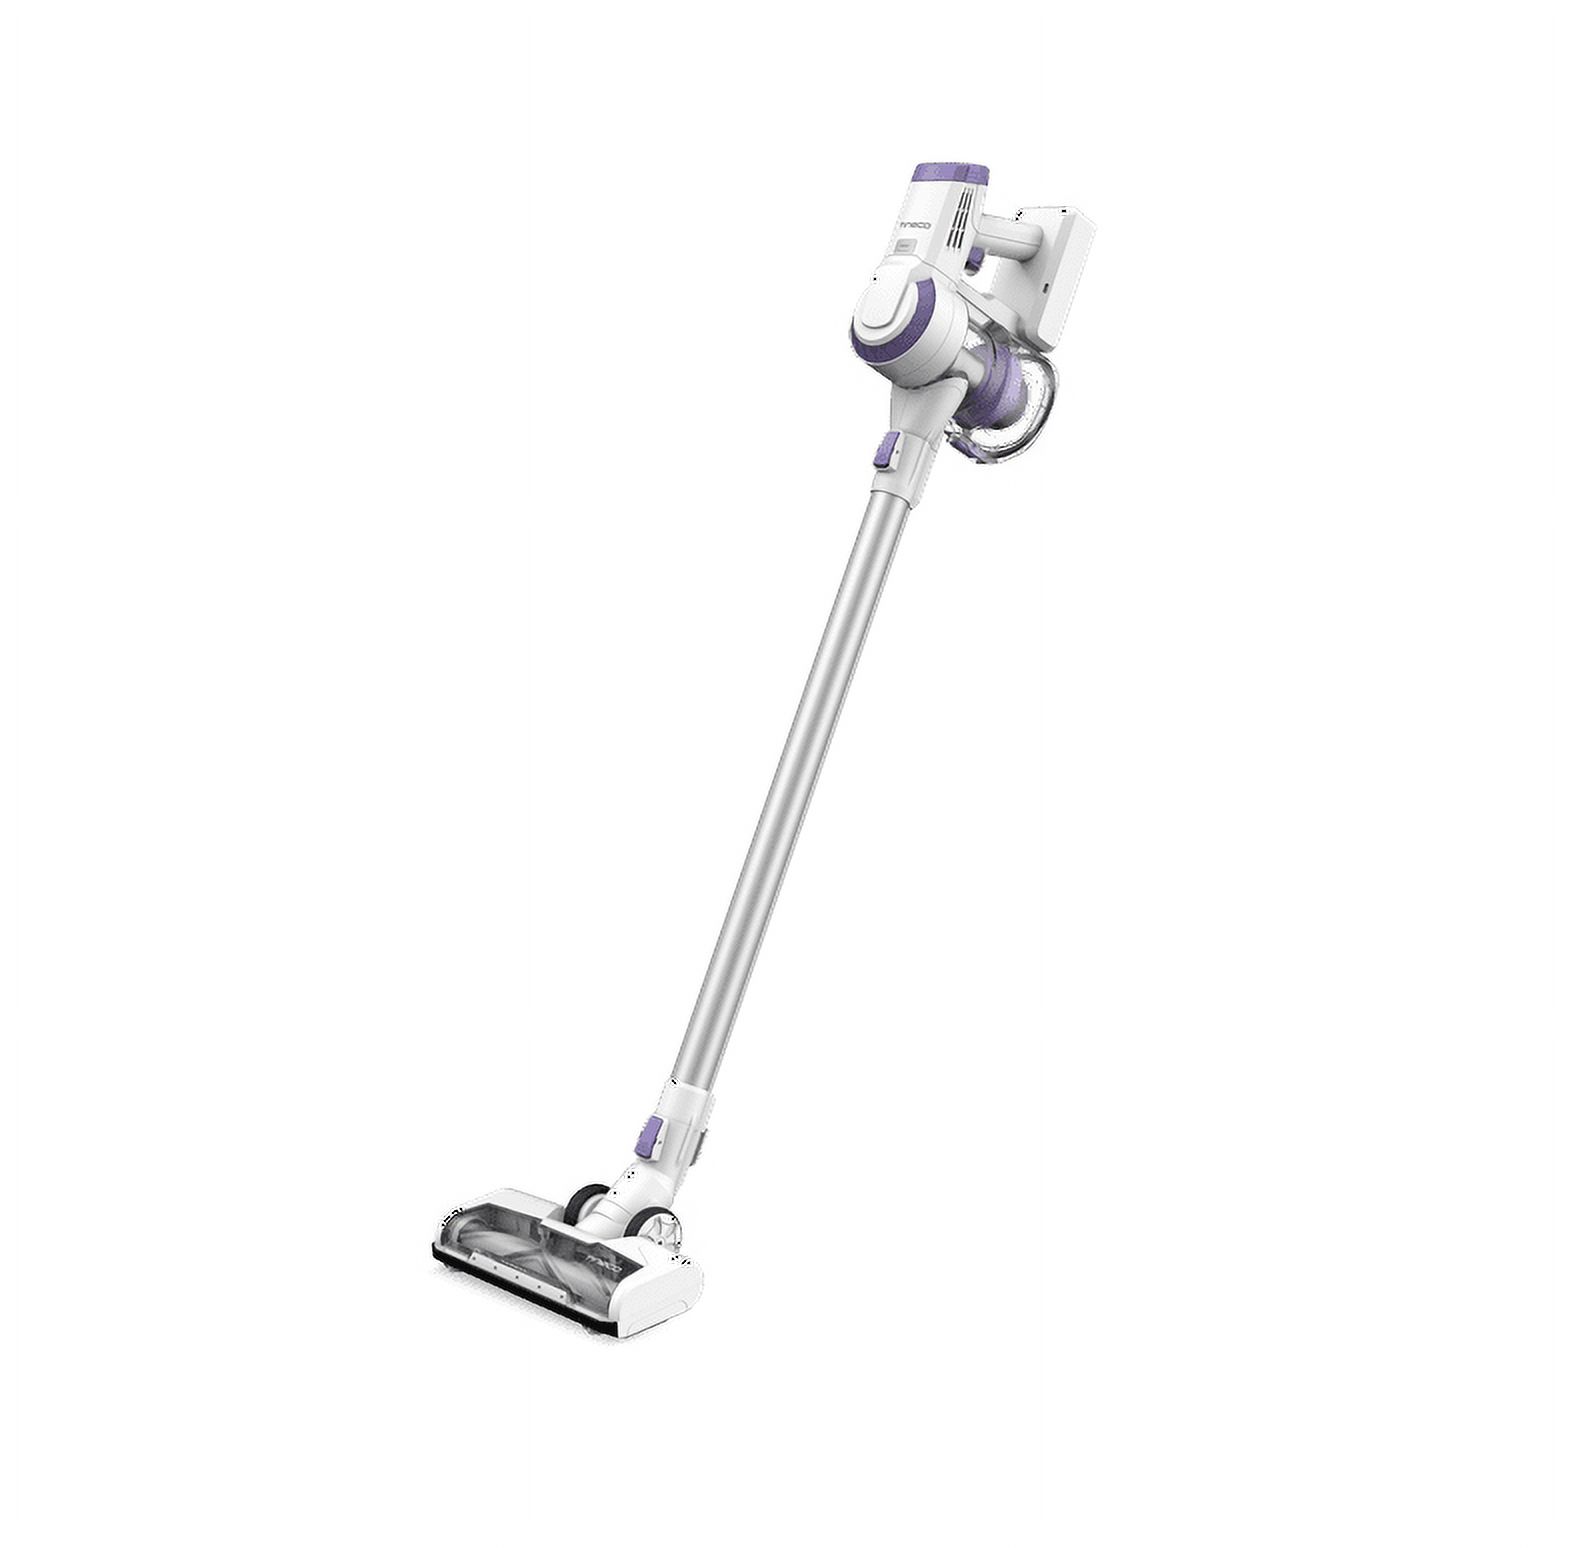 Tineco A10-D Plus - Cordless Ultralight Stick Vacuum Cleaner for Hard Floors and Low-Pile Rugs - image 1 of 6